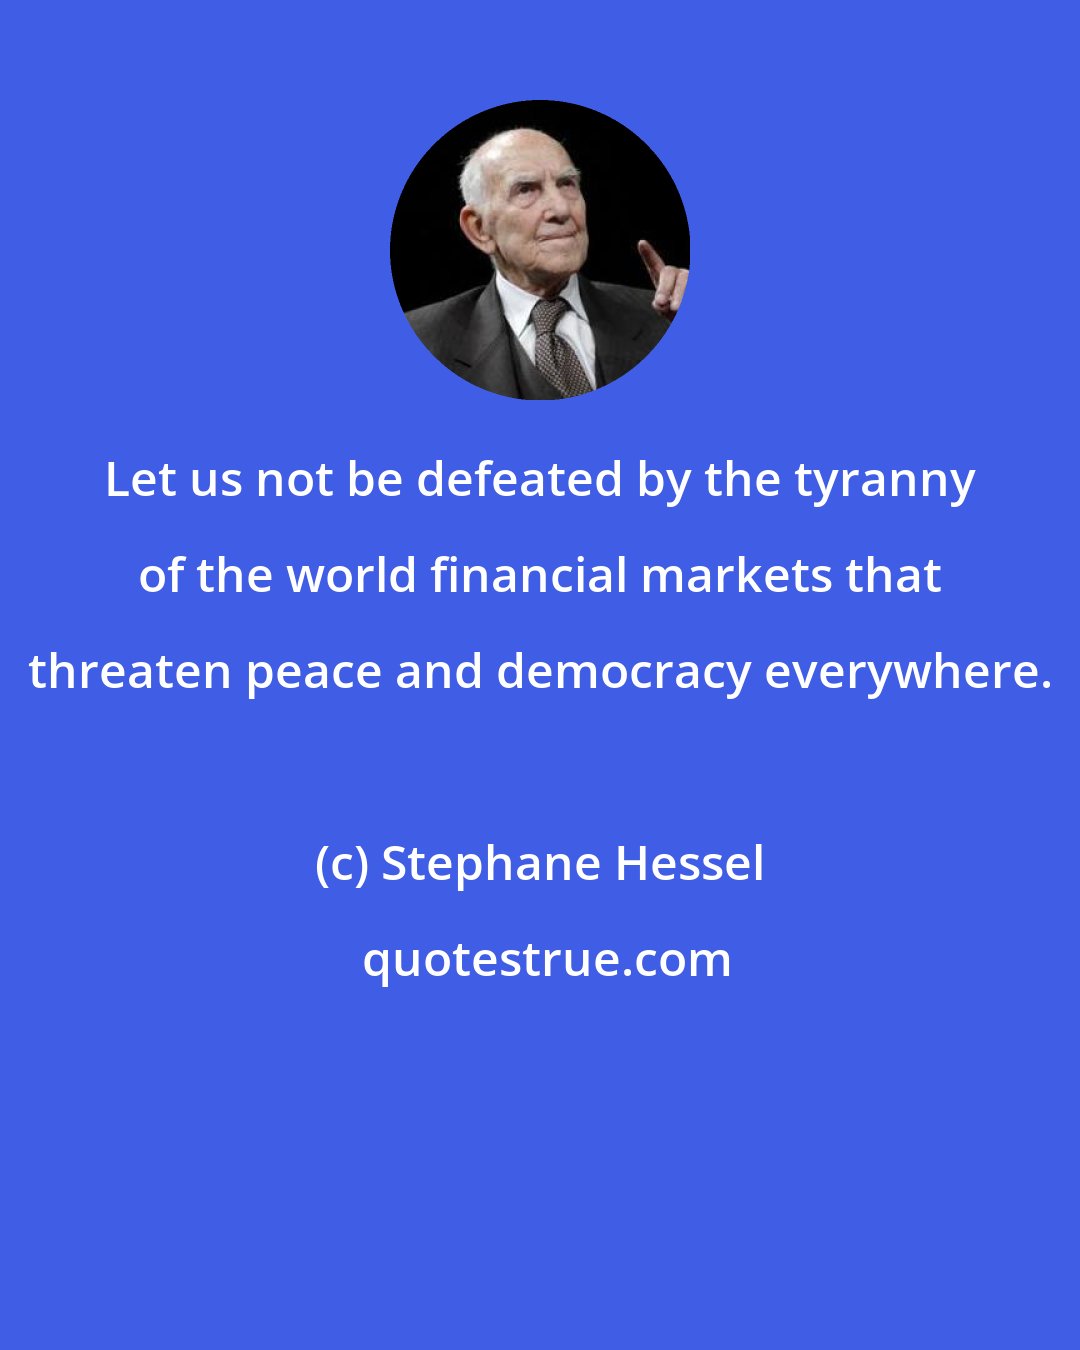 Stephane Hessel: Let us not be defeated by the tyranny of the world financial markets that threaten peace and democracy everywhere.